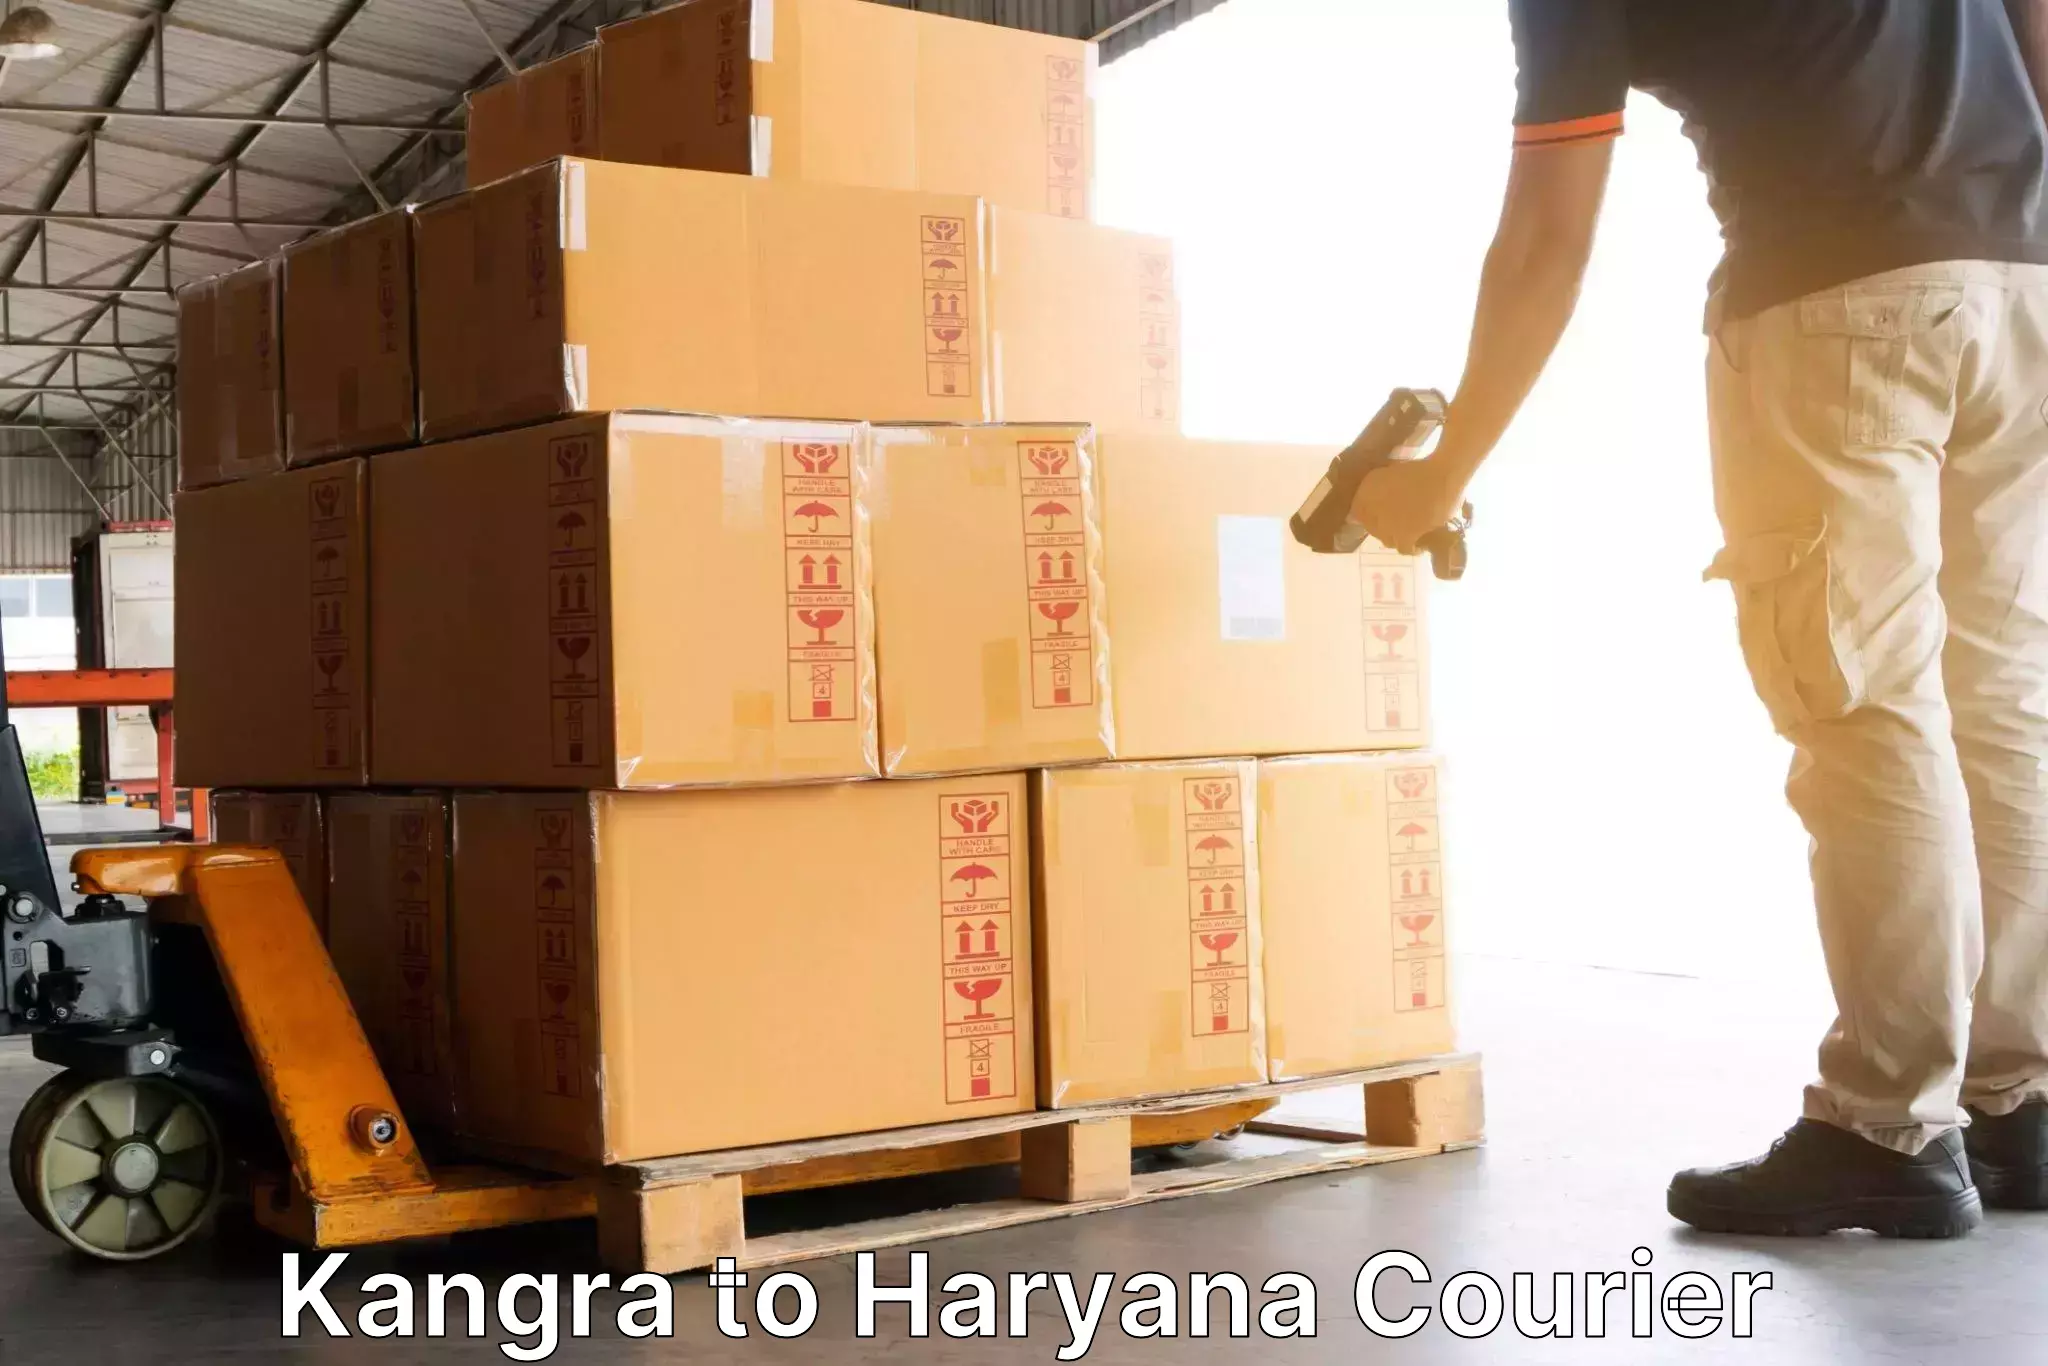 Package delivery network Kangra to Dharuhera